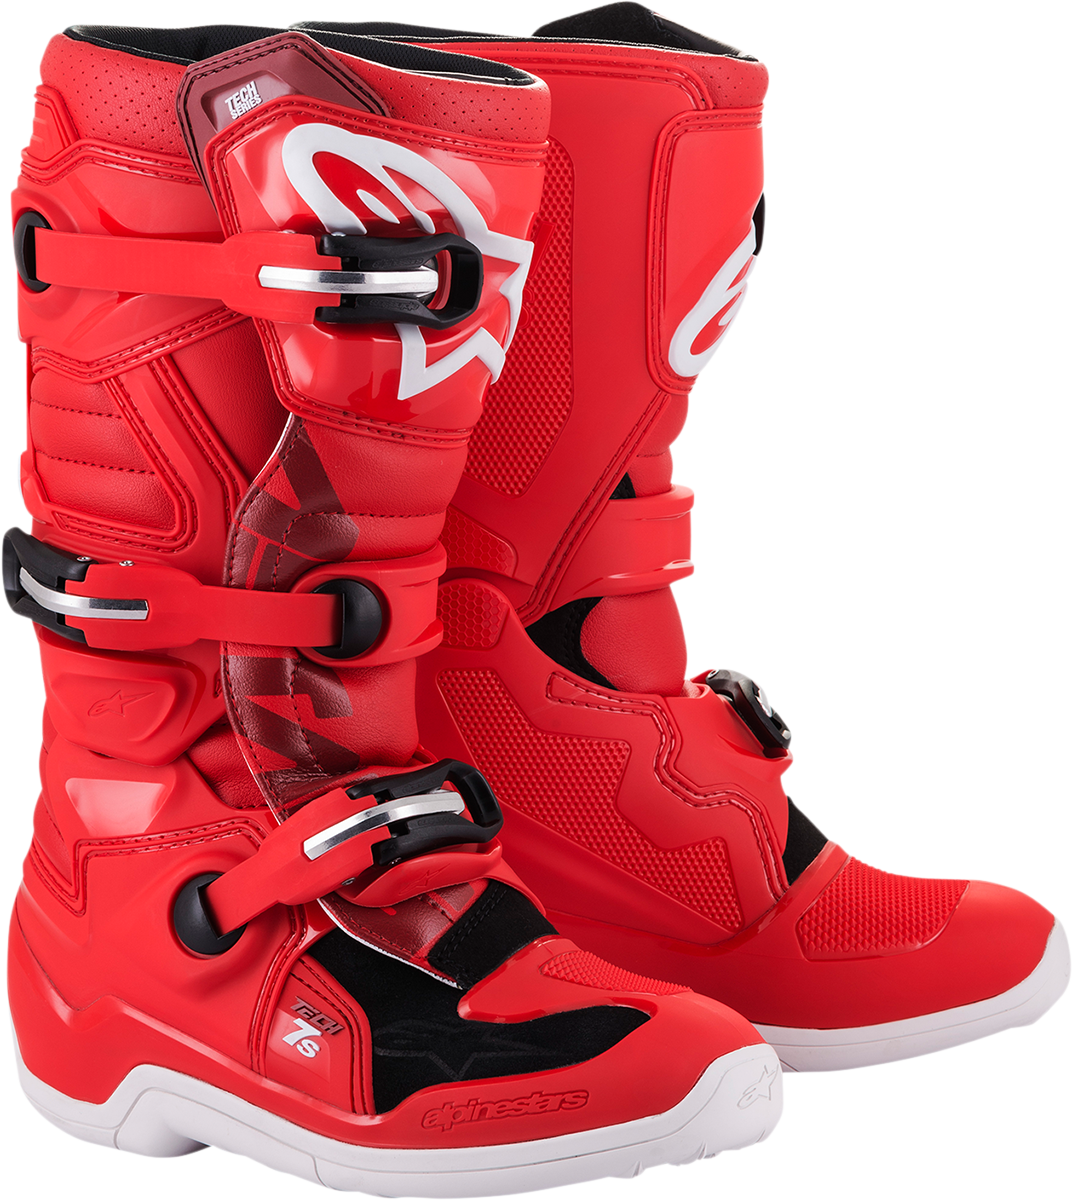 ALPINESTARS Youth Tech 7S Boots - Red - US 8 2015017-30-8